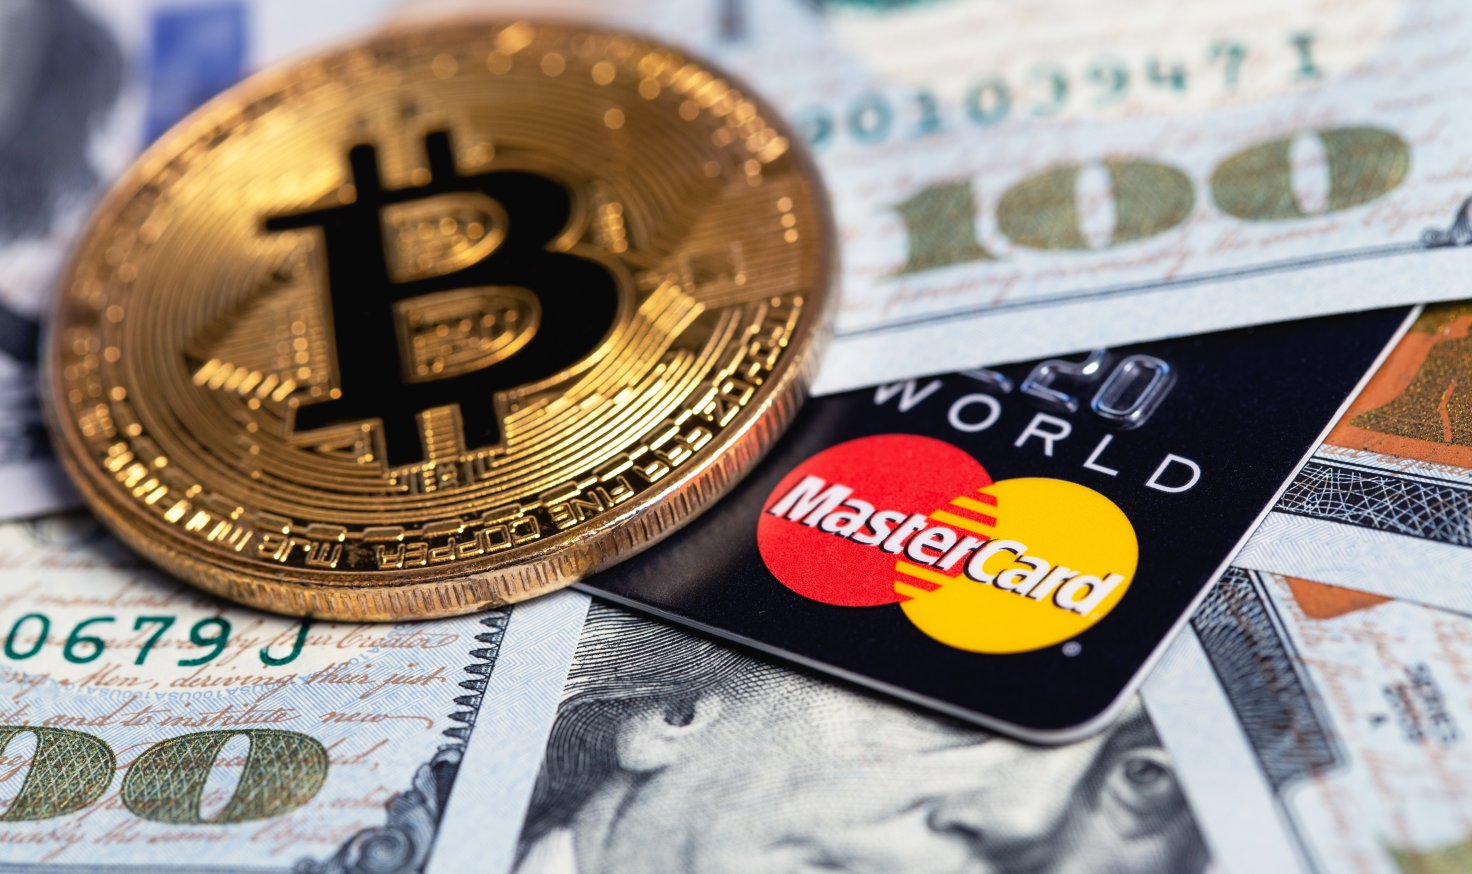 Gemini partners with Mastercard to launch new crypto rewards credit card this summer